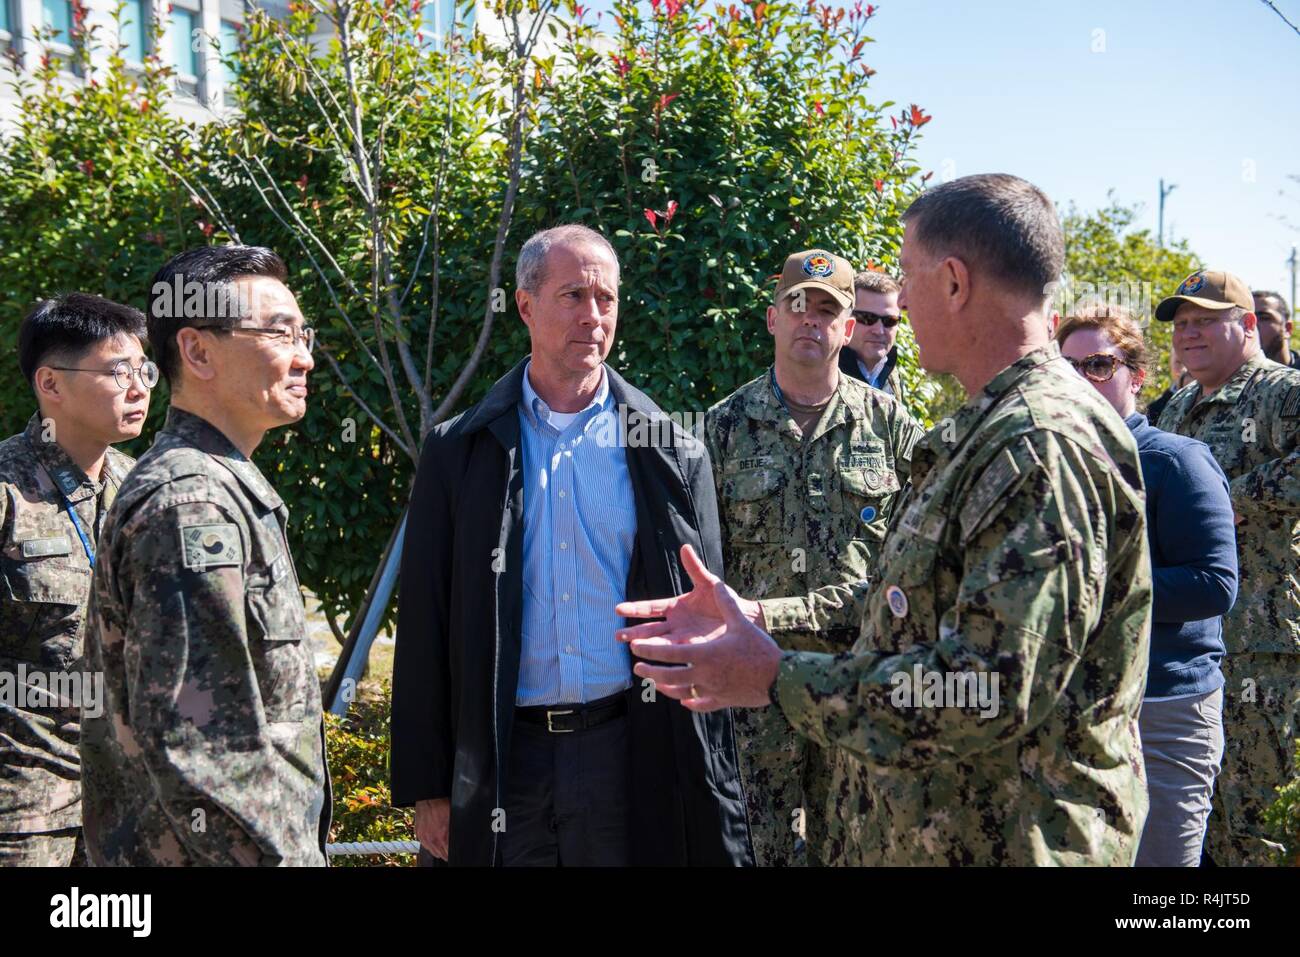 BUSAN, Republic of Korea (Oct. 30, 2018)  U.S. Rep. William McClellan 'Mac' Thornberry, chairman of the House Armed Services Committee (HASC), speaks with Rear Adm. Michael E. Boyle, commander, U.S. Naval Forces Korea (CNFK) and Republic of Korea (ROK) Navy Vice Adm. Jung, Jin-sup, commander, ROK Fleet. Thornberry's visit to CNFK is a part of an overall site visit to the Korean peninsula to meet with U.S. military components and gain a better understanding of the U.S. and ROK alliance. Stock Photo